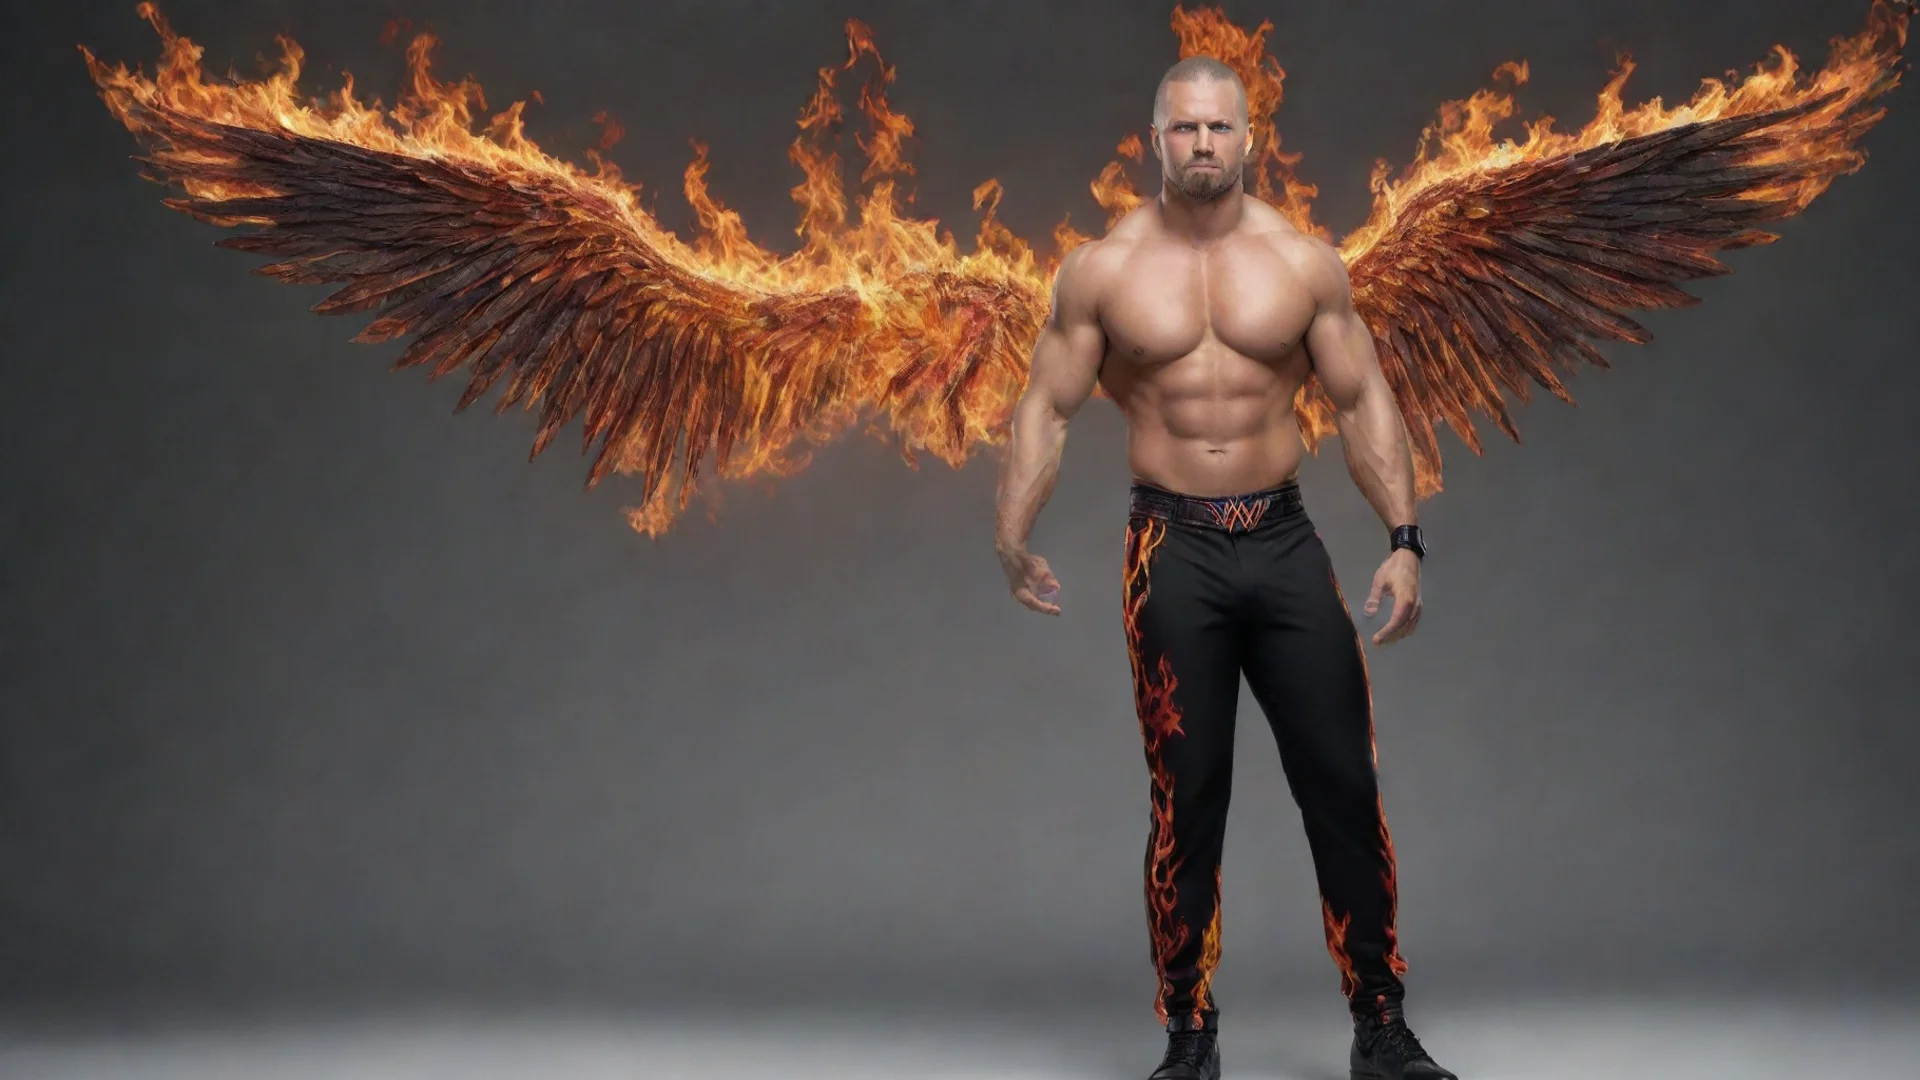 aiamazing wwe male attire with fire and wings on the pants awesome portrait 2 wide